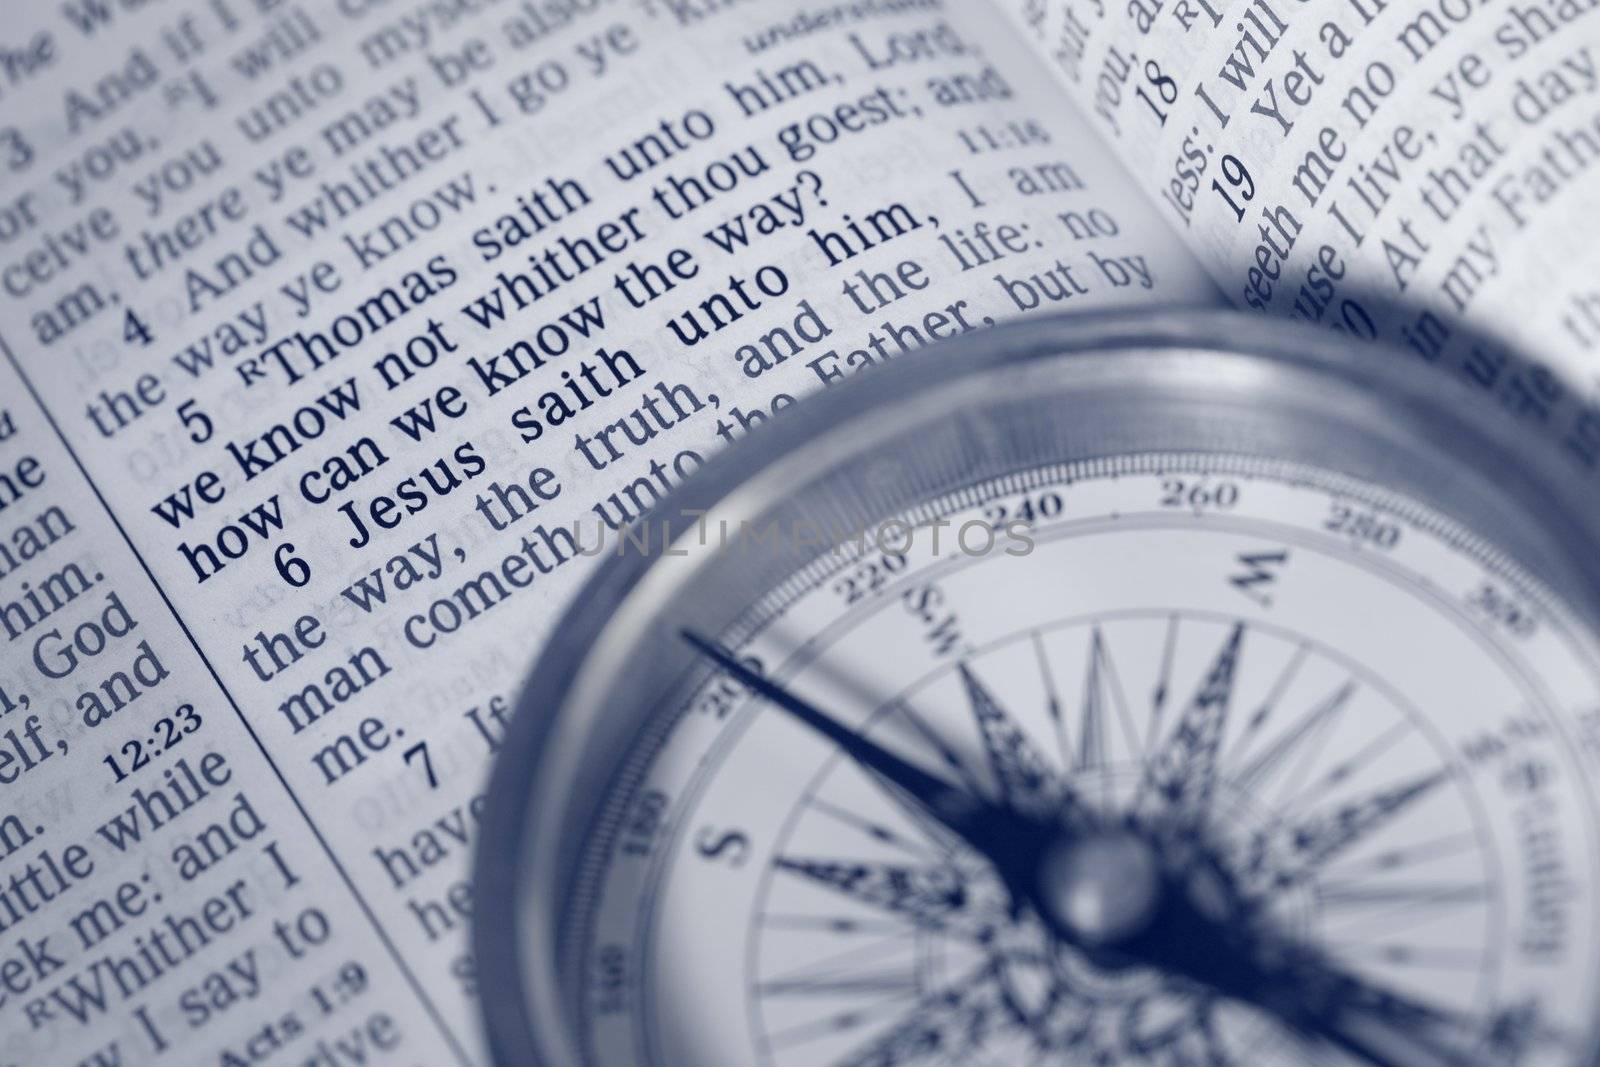 The way of Life - compass, bible and Jesus words to disciple Thomas.